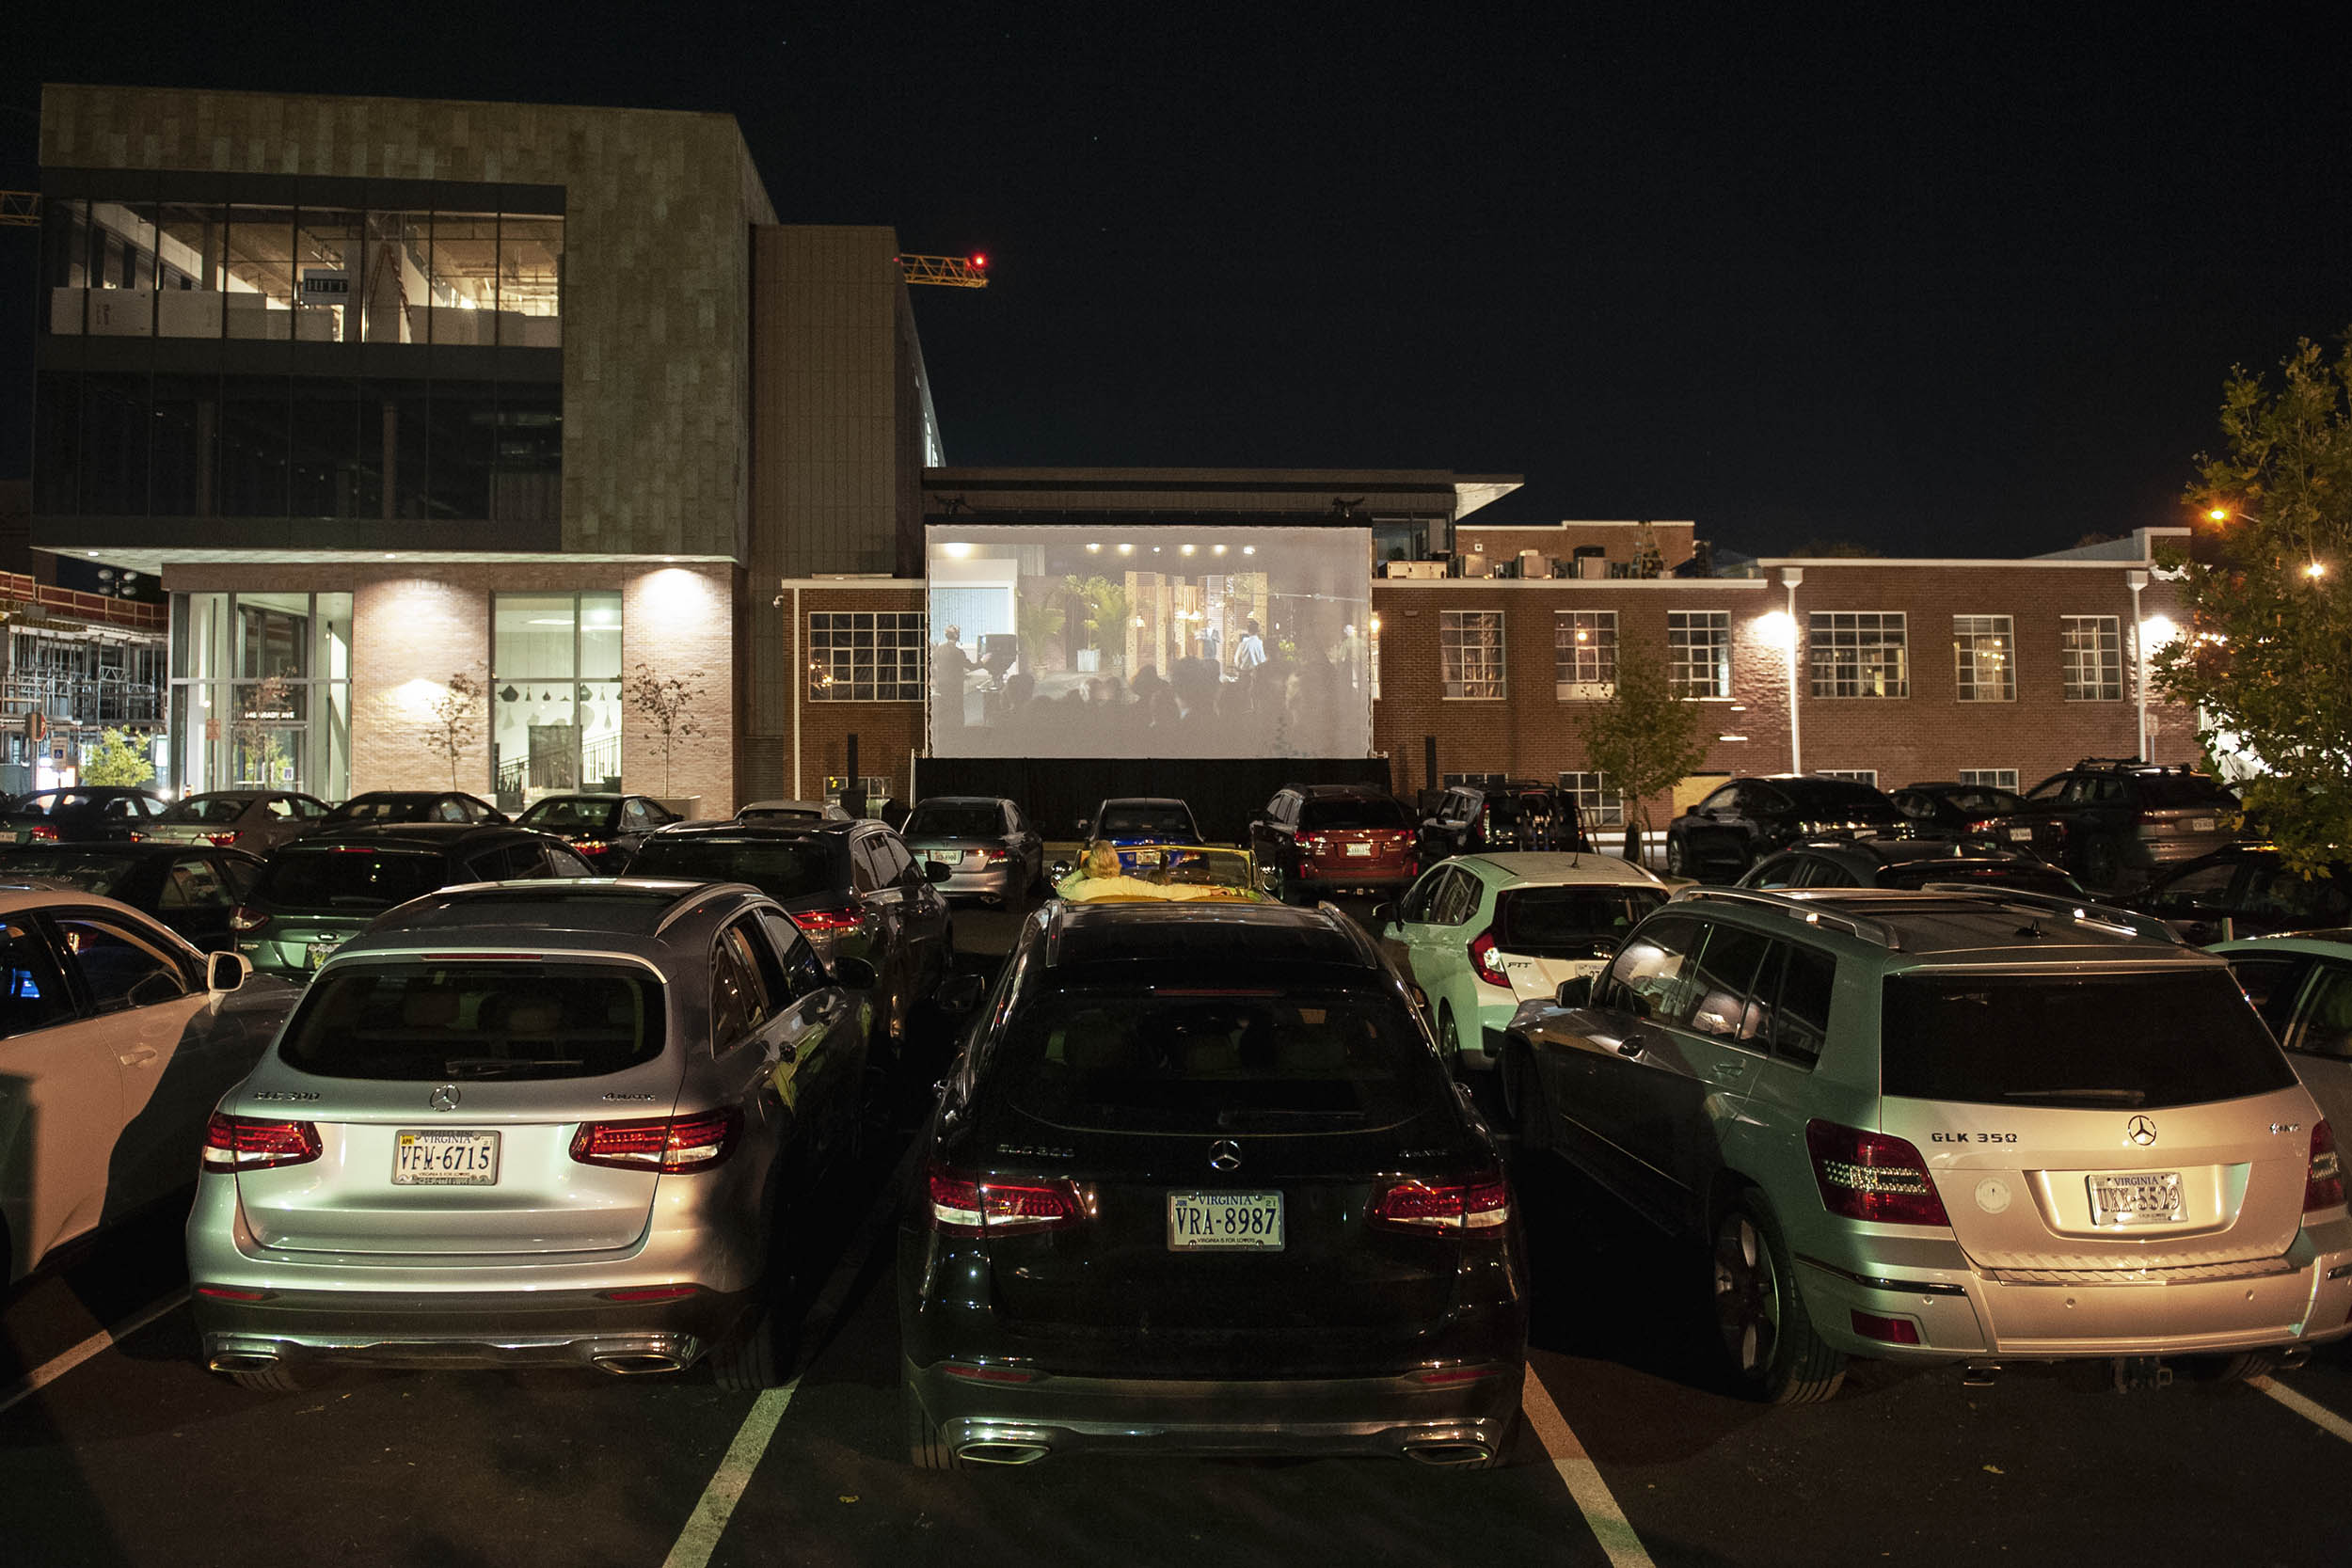 Cars in parking lot watching a movie on a screen outside of a building